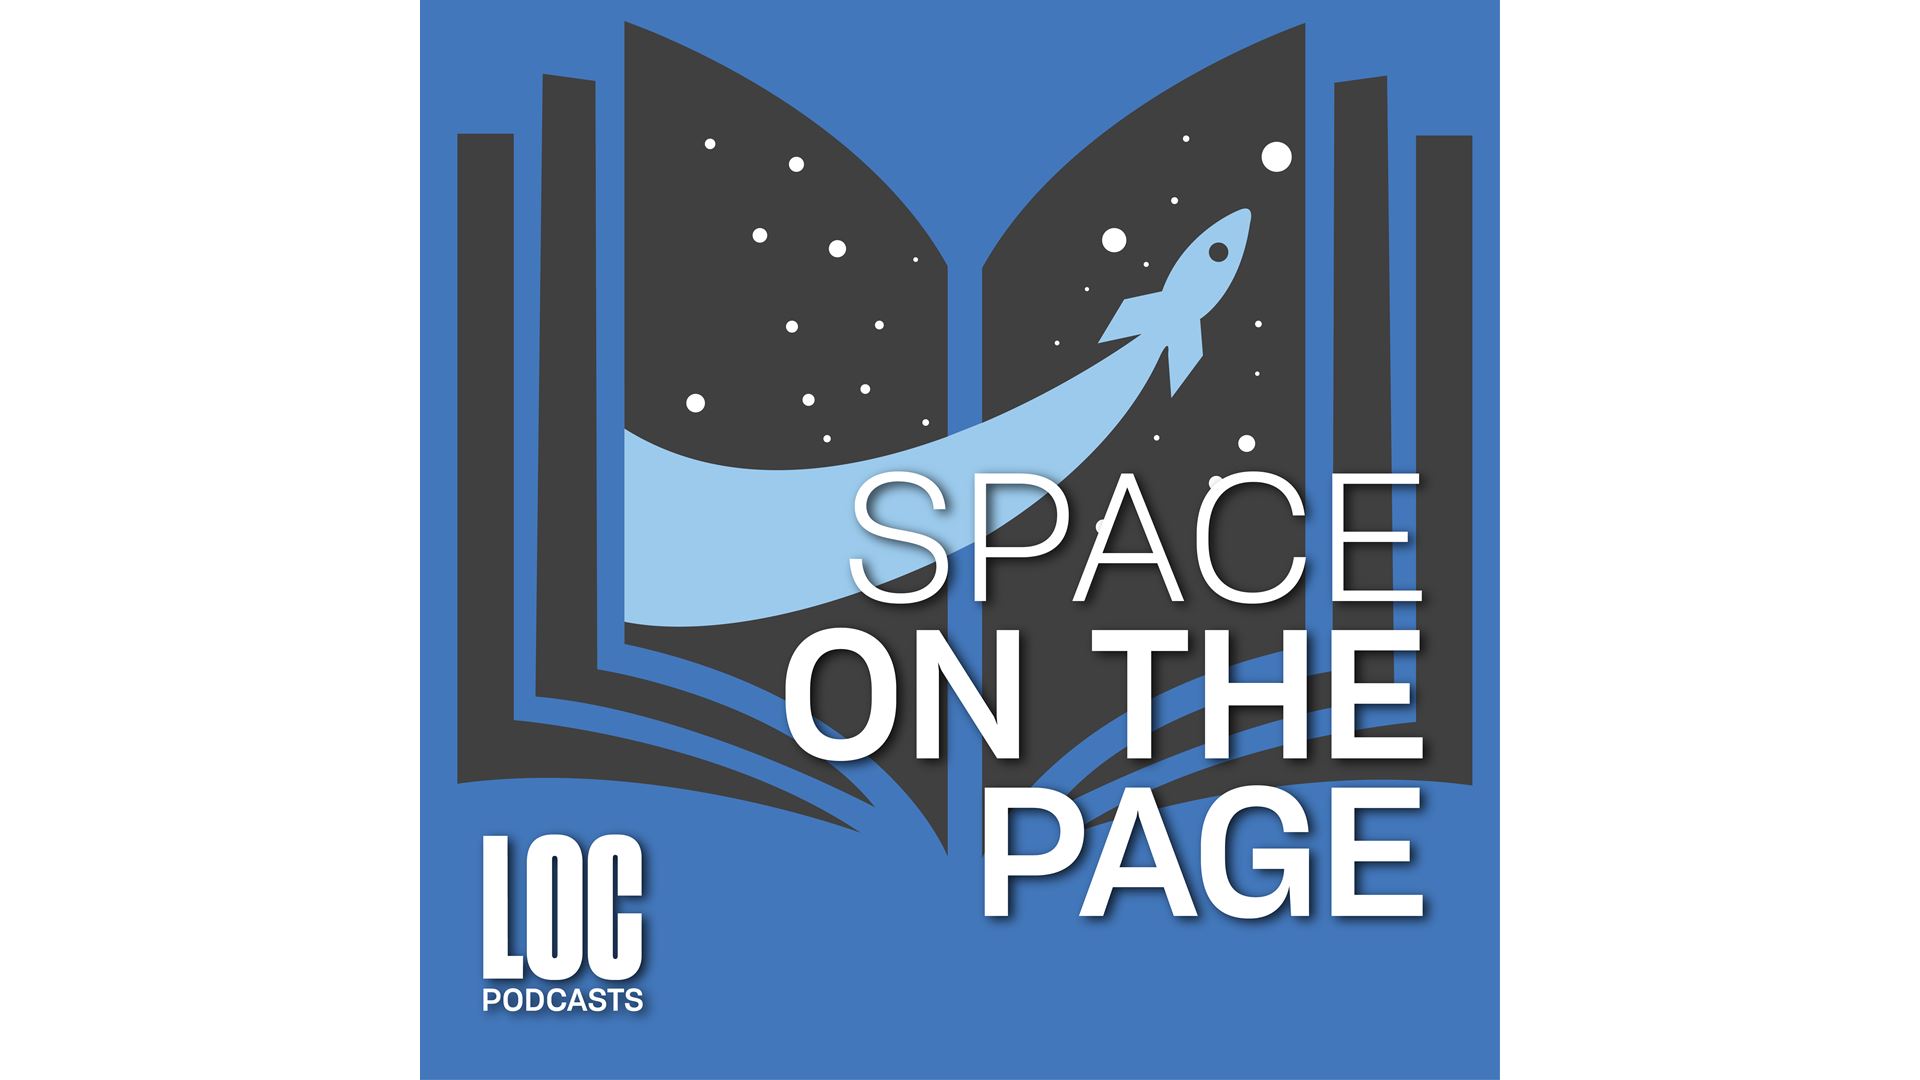 New Library of Congress Podcast Explores “Space on the Page”